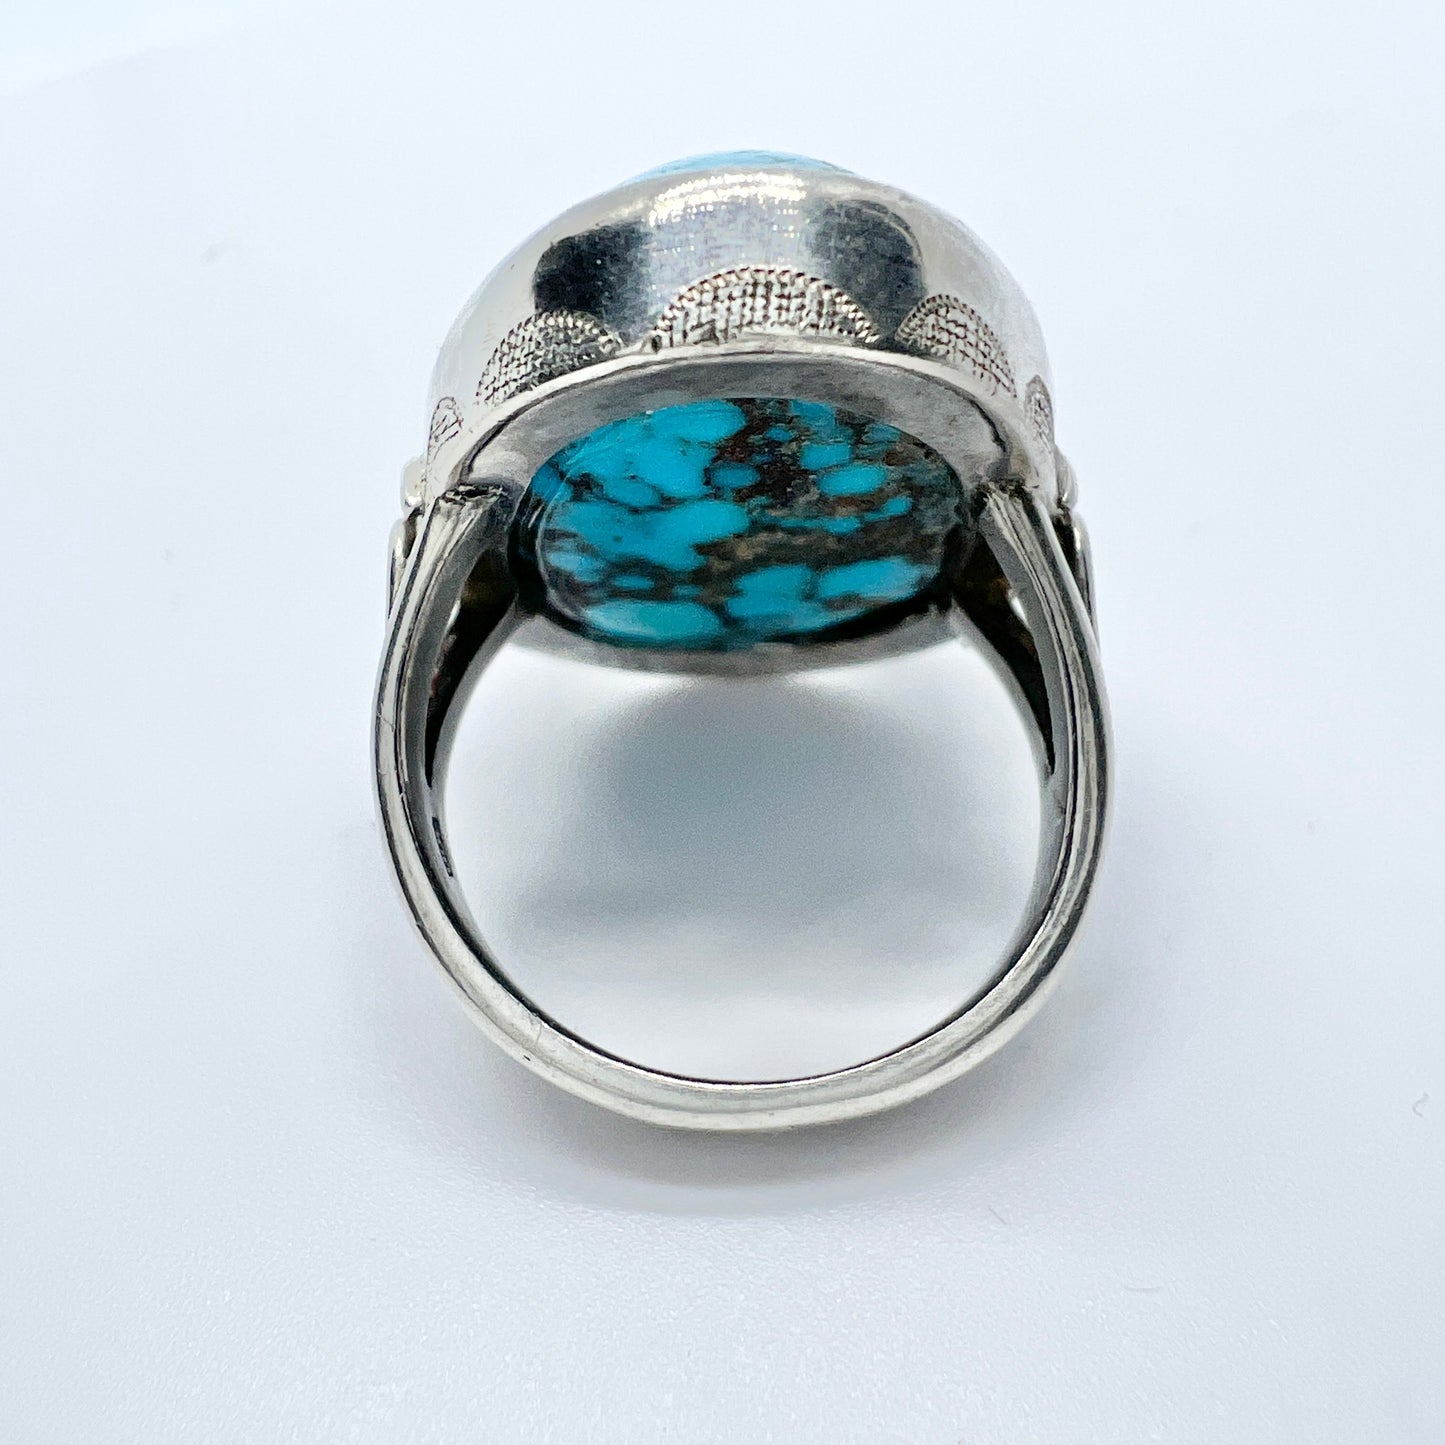 Early 1900s Arts & Crafts Solid 900 Silver Turquoise Ring.